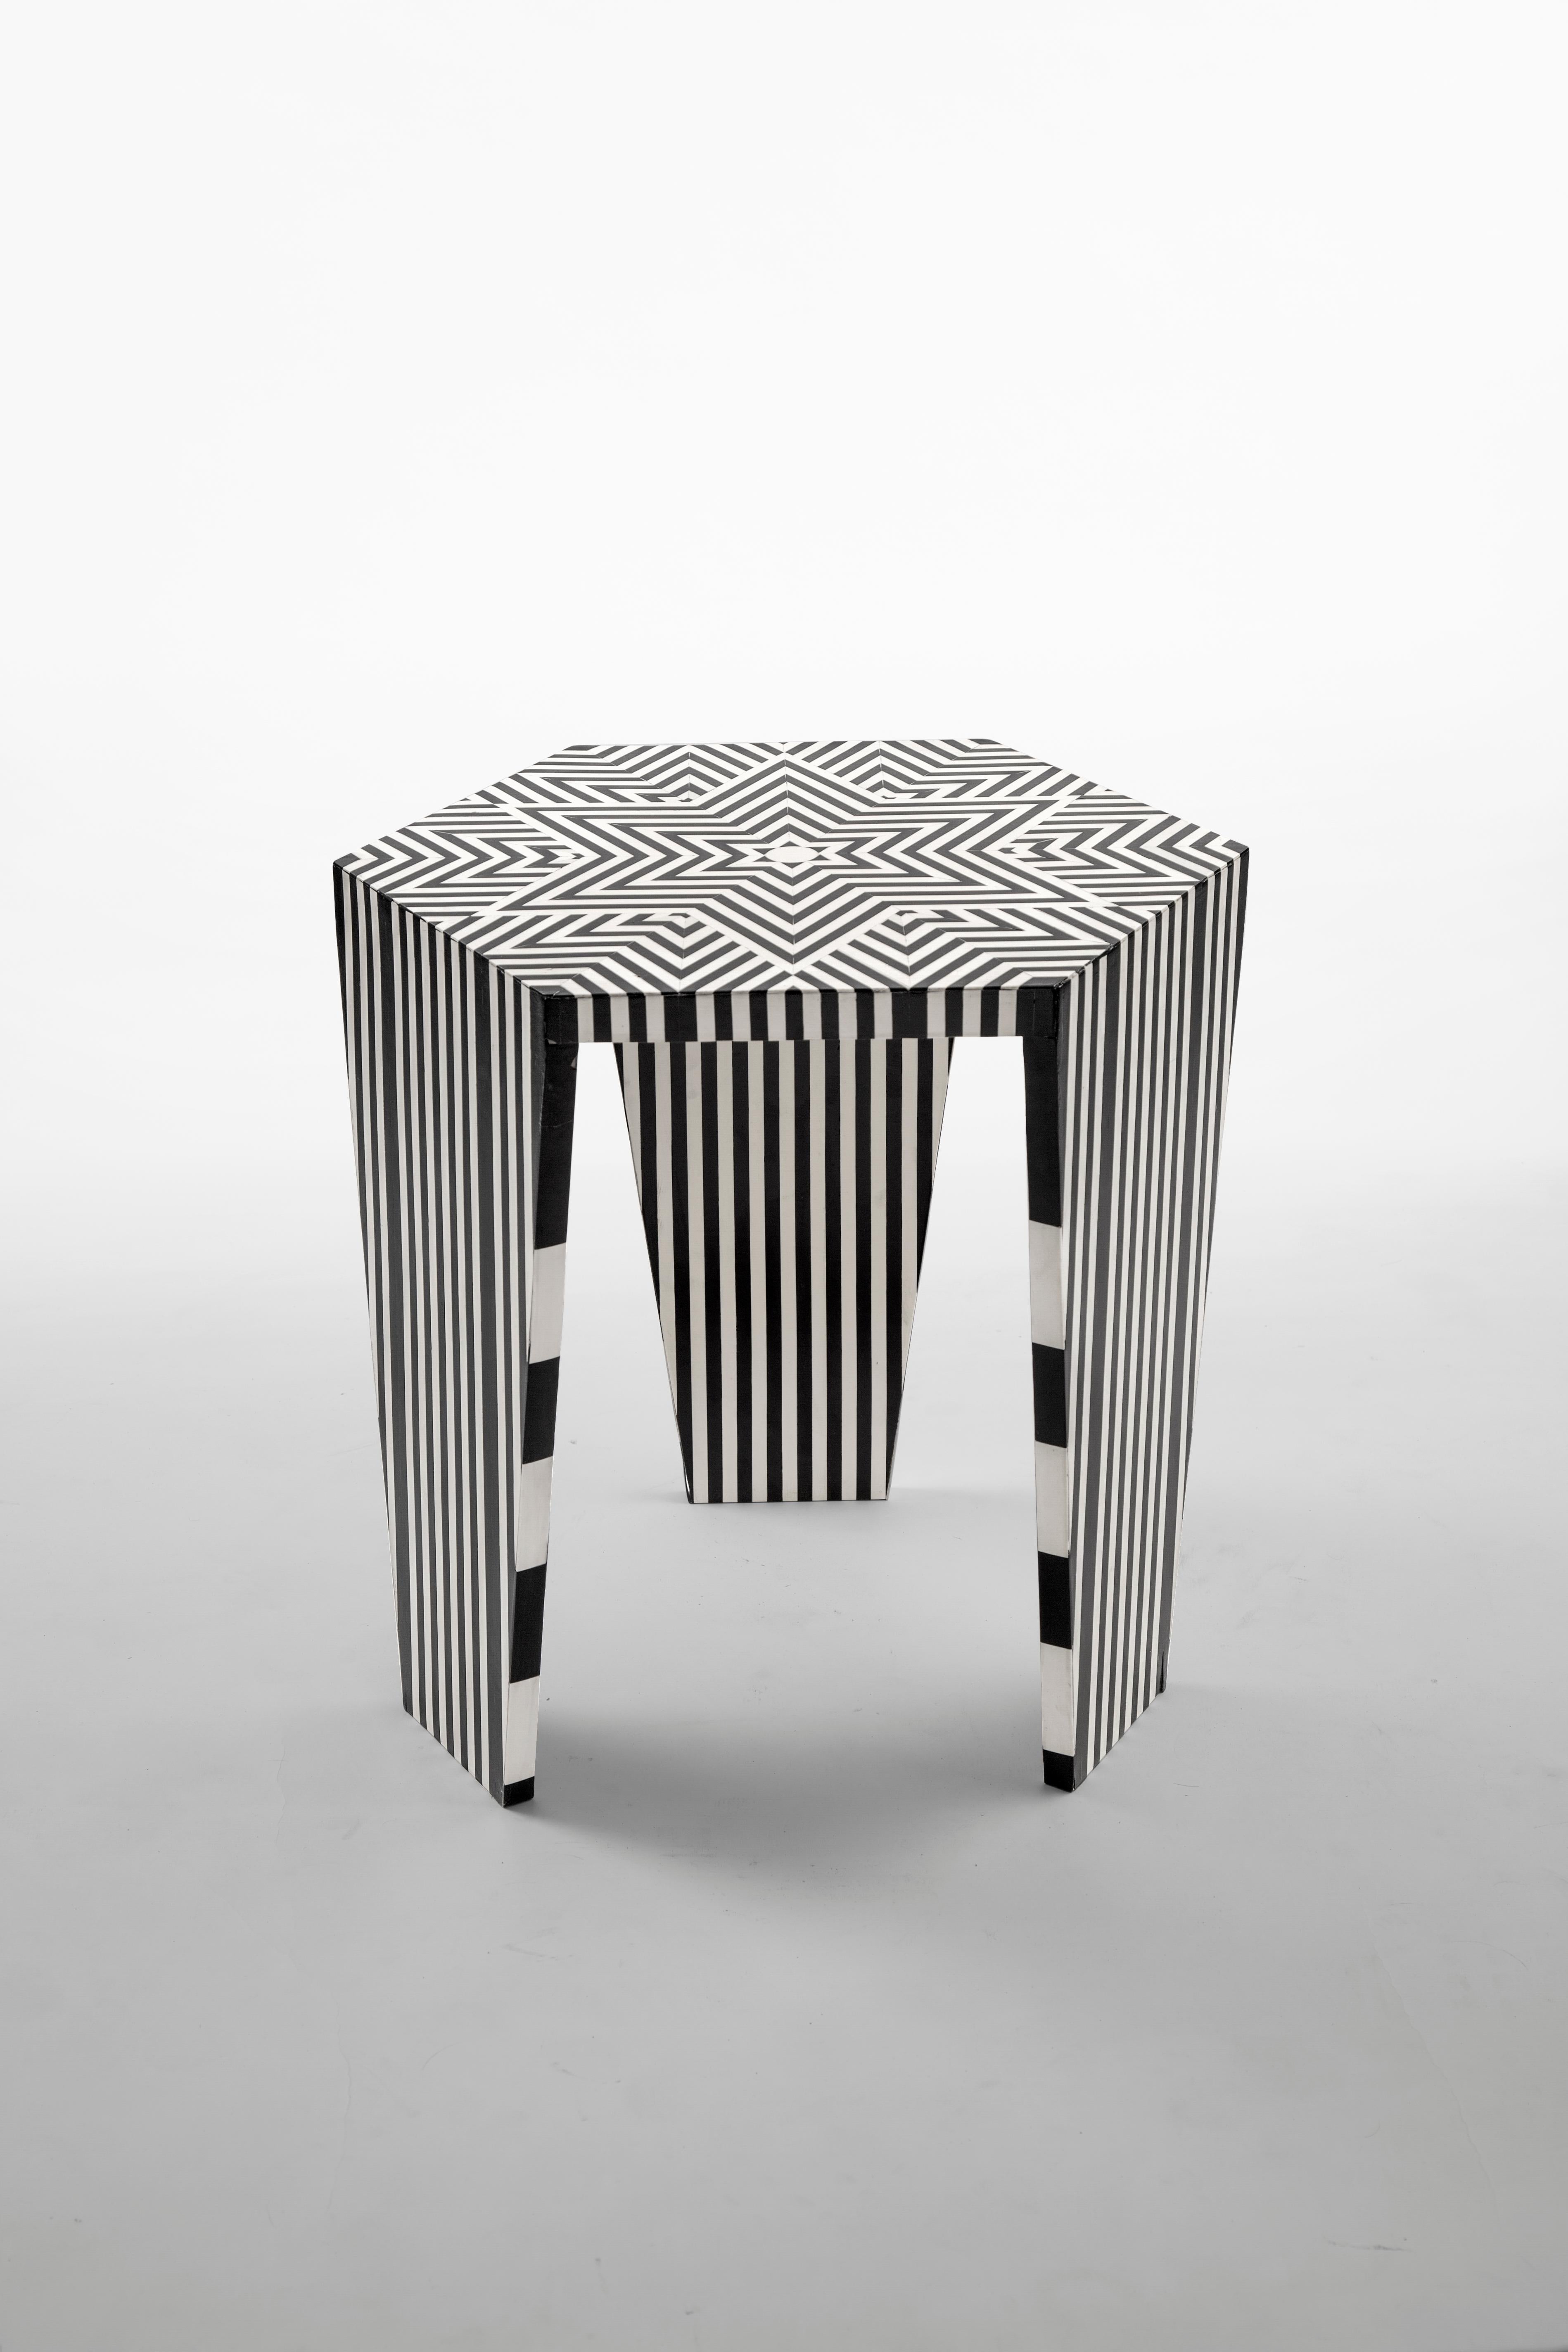 Modern Hand-Crafted Side Table with Black & White Star Pattern Made of Acrylic - Large